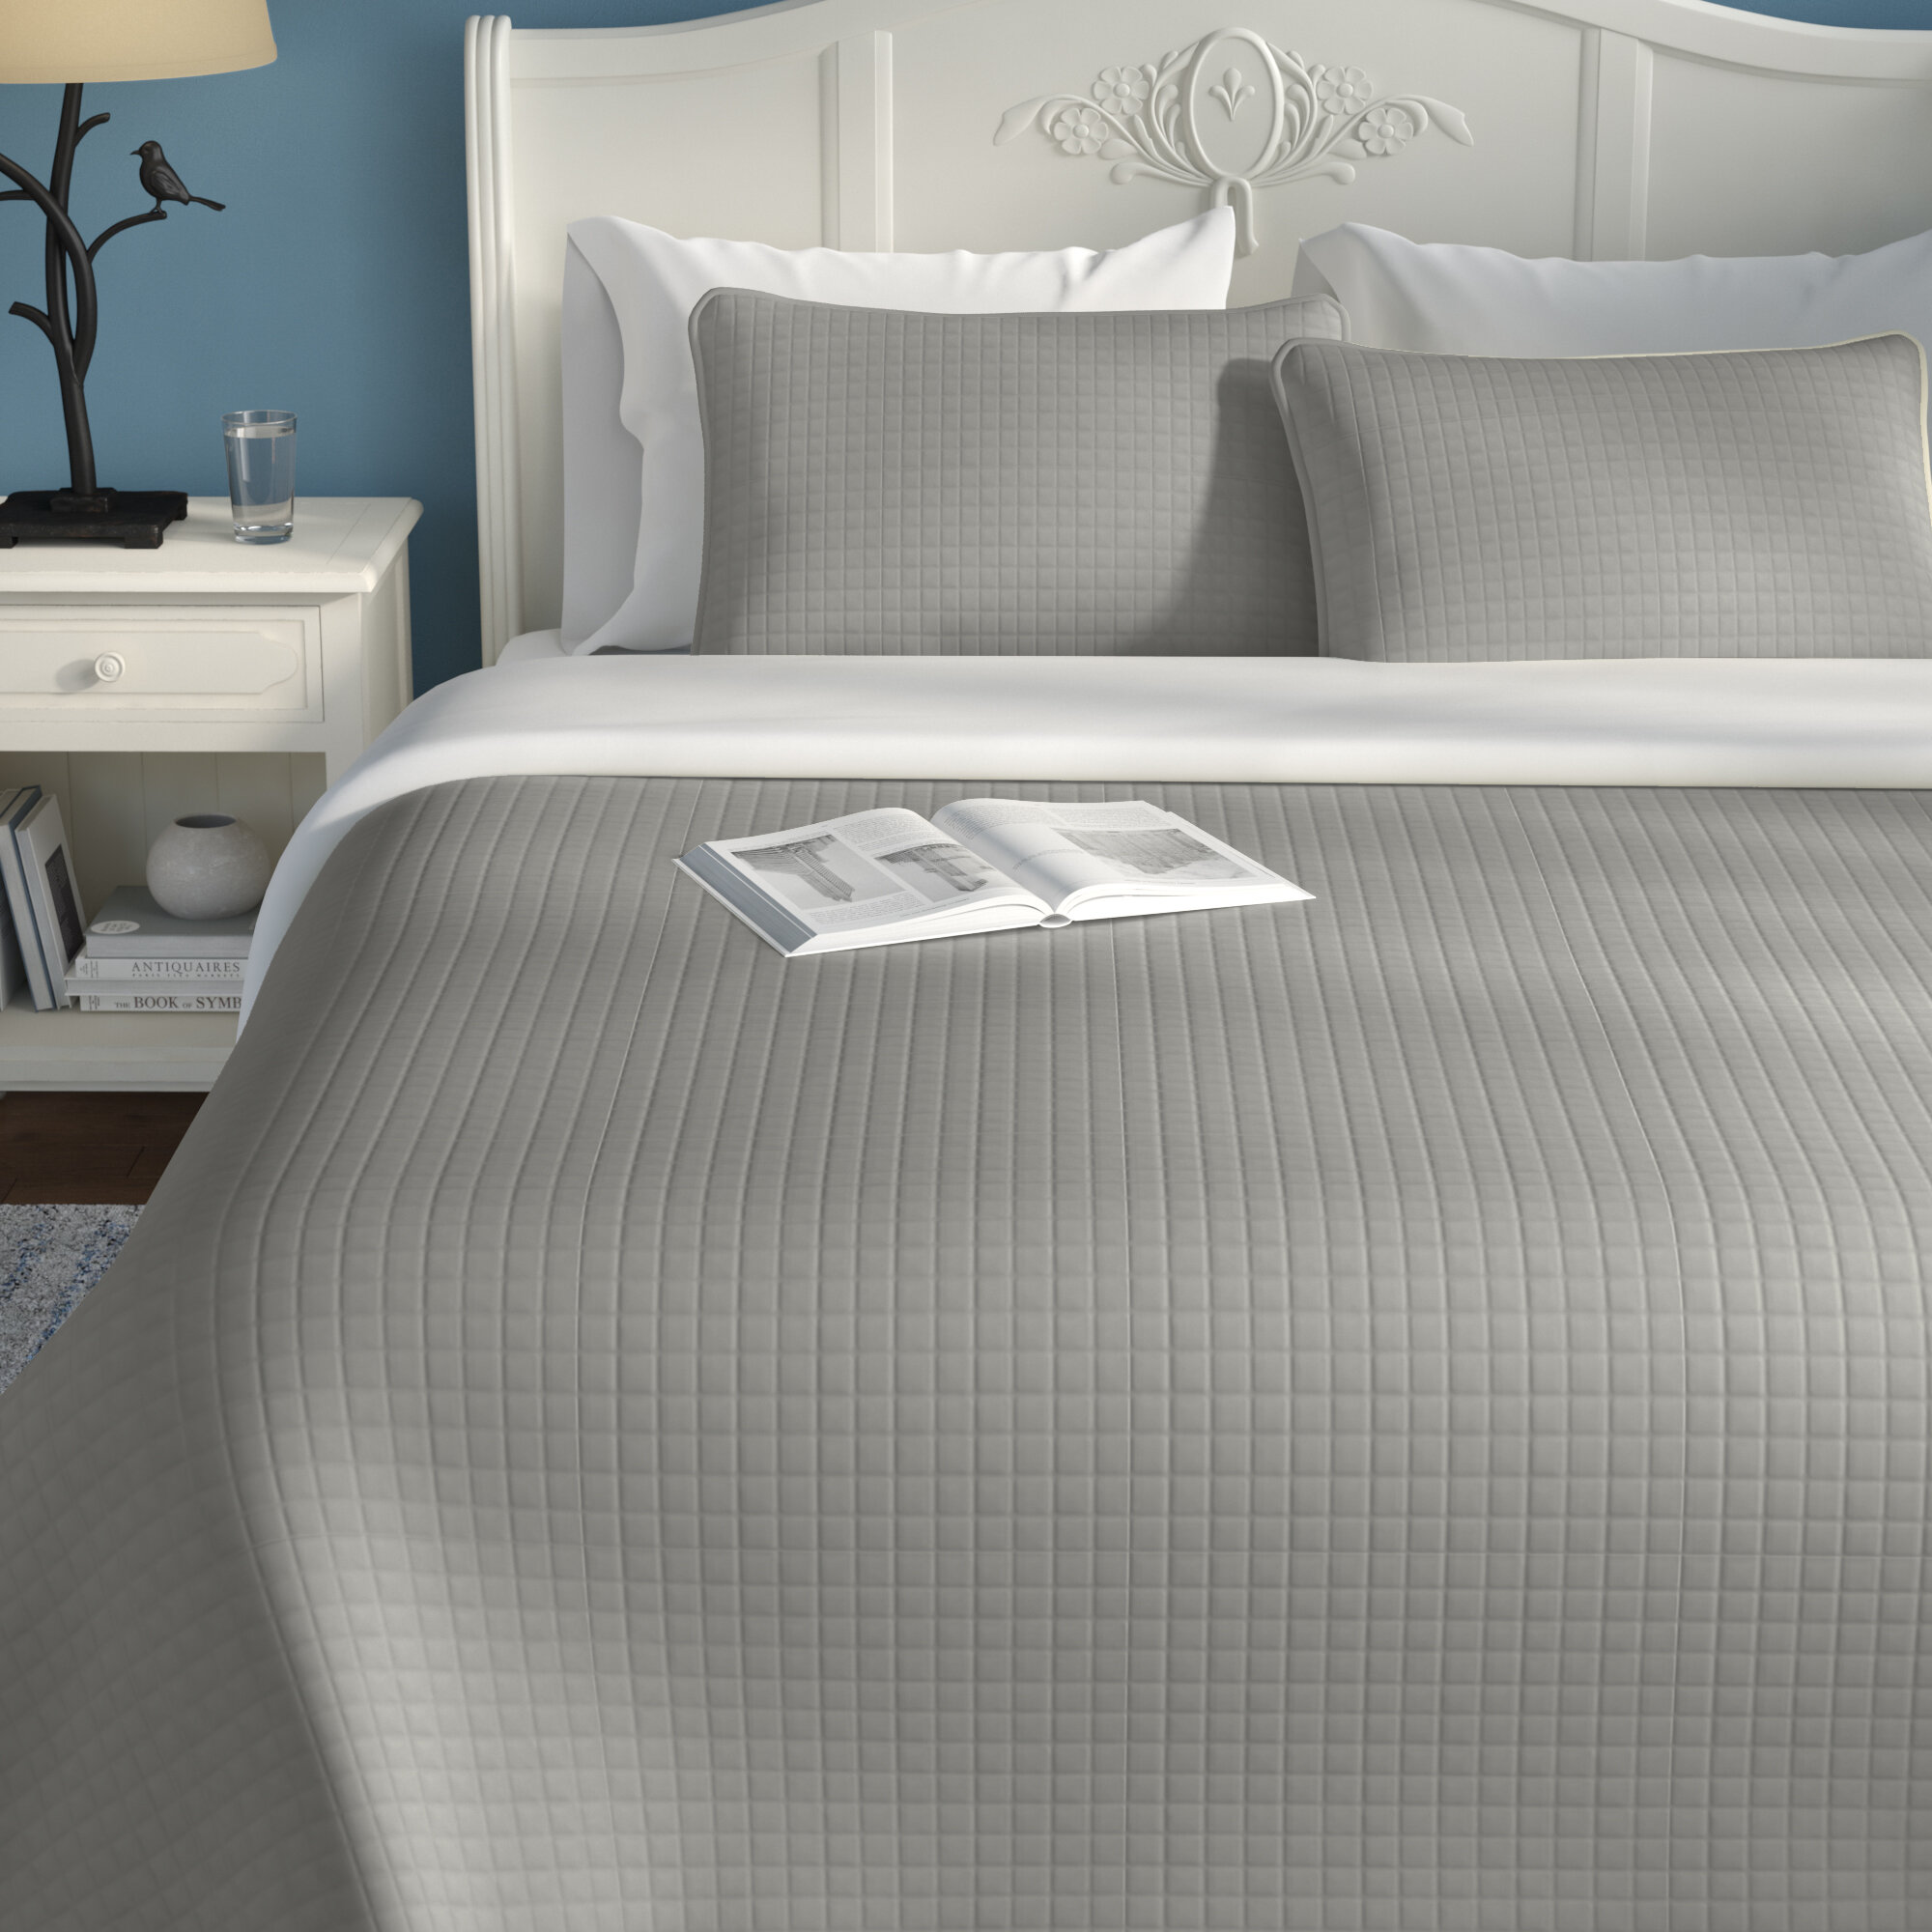 Wayfair Gray Silver Teal Bedding You Ll Love In 2021